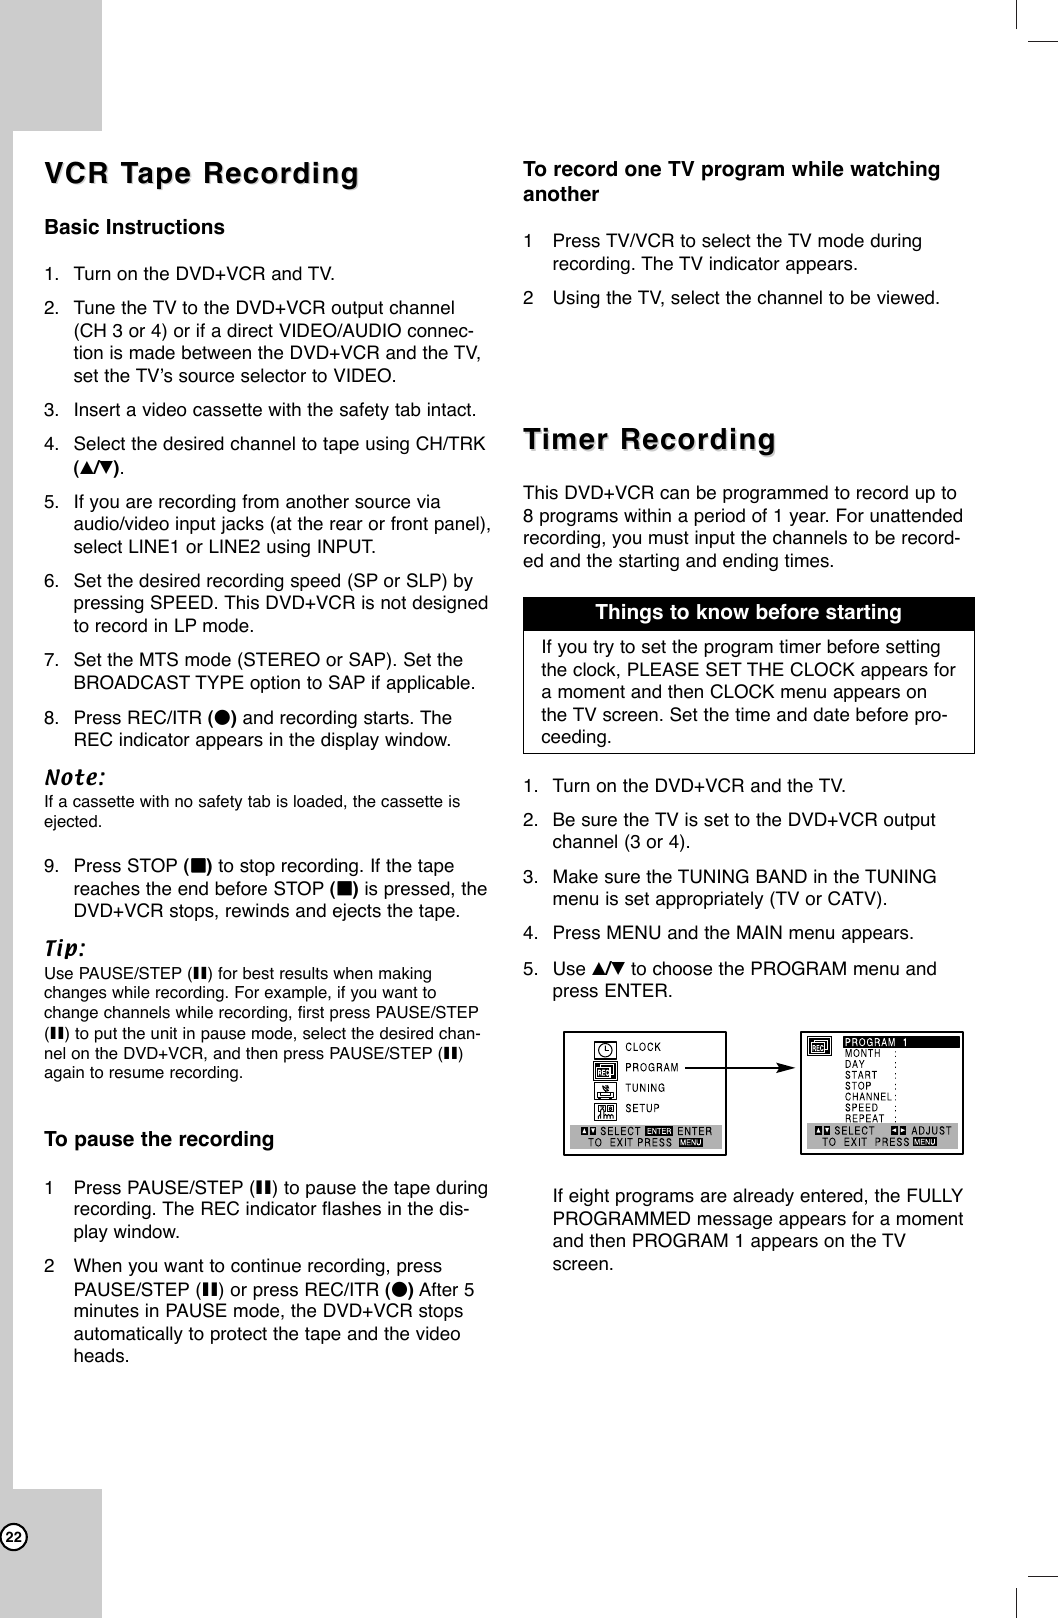 22VCR TVCR Tape Recordingape RecordingBasic Instructions1. Turn on the DVD+VCR and TV.2. Tune the TV to the DVD+VCR output channel(CH 3 or 4) or if a direct VIDEO/AUDIO connec-tion is made between the DVD+VCR and the TV,set the TV’s source selector to VIDEO.3. Insert a video cassette with the safety tab intact.4. Select the desired channel to tape using CH/TRK(v/V).5. If you are recording from another source viaaudio/video input jacks (at the rear or front panel),select LINE1 or LINE2 using INPUT.6. Set the desired recording speed (SP or SLP) bypressing SPEED. This DVD+VCR is not designedto record in LP mode.7. Set the MTS mode (STEREO or SAP). Set theBROADCAST TYPE option to SAP if applicable.8. Press REC/ITR (z)and recording starts. TheREC indicator appears in the display window. Note: If a cassette with no safety tab is loaded, the cassette isejected.9. Press STOP (xx)to stop recording. If the tapereaches the end before STOP (xx)is pressed, theDVD+VCR stops, rewinds and ejects the tape.Tip: Use PAUSE/STEP (X) for best results when makingchanges while recording. For example, if you want tochange channels while recording, first press PAUSE/STEP(X) to put the unit in pause mode, select the desired chan-nel on the DVD+VCR, and then press PAUSE/STEP (X)again to resume recording.To pause the recording1Press PAUSE/STEP (X) to pause the tape duringrecording. The REC indicator flashes in the dis-play window.2When you want to continue recording, pressPAUSE/STEP (X) or press REC/ITR (z)After 5minutes in PAUSE mode, the DVD+VCR stopsautomatically to protect the tape and the videoheads. To record one TV program while watchinganother1Press TV/VCR to select the TV mode duringrecording. The TV indicator appears.2Using the TV, select the channel to be viewed.TTimer Recordingimer RecordingThis DVD+VCR can be programmed to record up to8 programs within a period of 1 year. For unattendedrecording, you must input the channels to be record-ed and the starting and ending times.1. Turn on the DVD+VCR and the TV.2. Be sure the TV is set to the DVD+VCR outputchannel (3 or 4).3. Make sure the TUNING BAND in the TUNINGmenu is set appropriately (TV or CATV).4. Press MENU and the MAIN menu appears.5. Use v/Vto choose the PROGRAM menu andpress ENTER. If eight programs are already entered, the FULLYPROGRAMMED message appears for a momentand then PROGRAM 1 appears on the TVscreen. If you try to set the program timer before settingthe clock, PLEASE SET THE CLOCK appears fora moment and then CLOCK menu appears onthe TV screen. Set the time and date before pro-ceeding.Things to know before starting